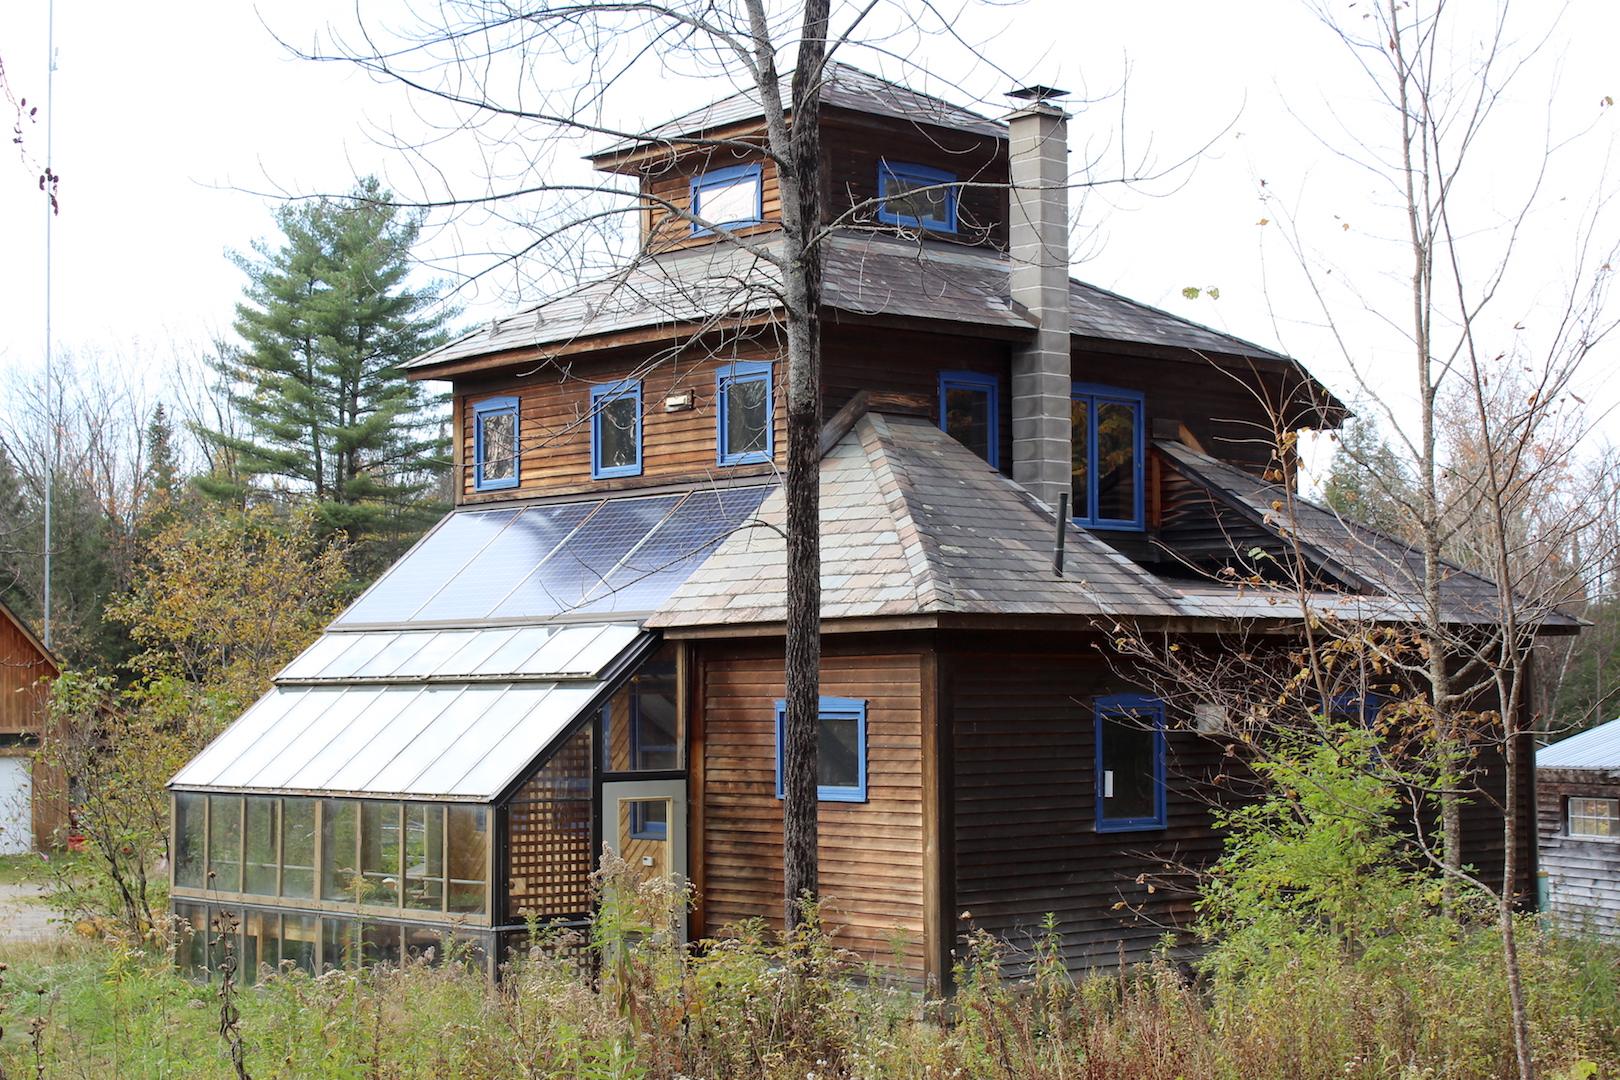 How to Find Off Grid Homes for Sale